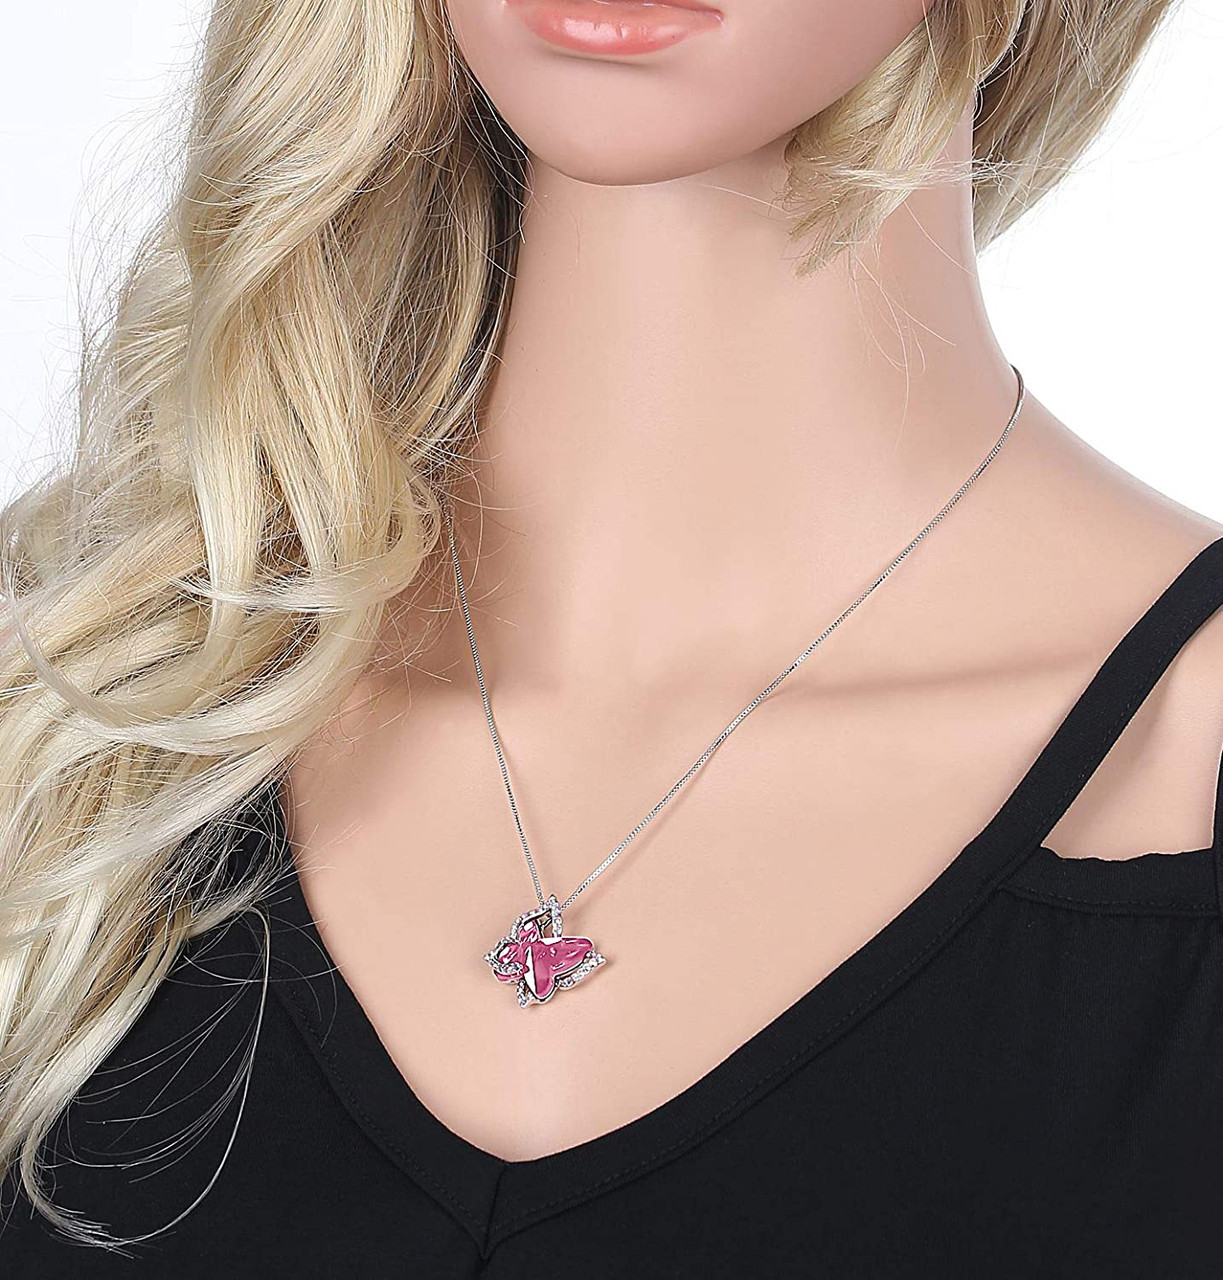 October Birthstone - Rose Light Pink Double Butterflies Design Crystal Pendant and CZ stones - with 18" Chain Necklace. Gift for Lover, Girl Friend, Wife, Valentine's Day Gift, Mother's Day, Anniversary Gift Butterfly Necklace.